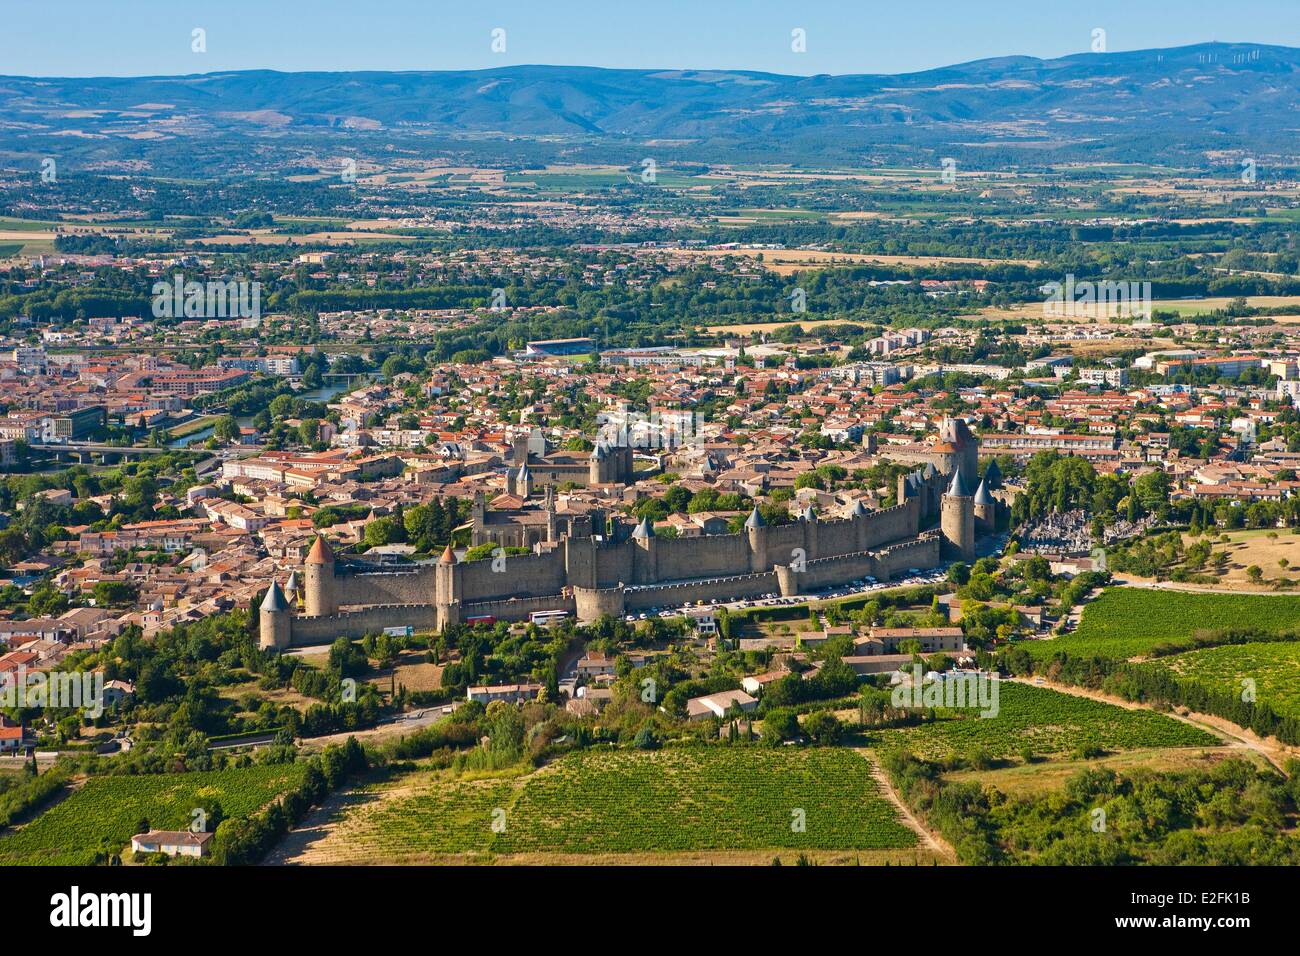 France, Aude, Carcassonne, Medieval city listed as World Heritage by UNESCO (aerial view) Stock Photo